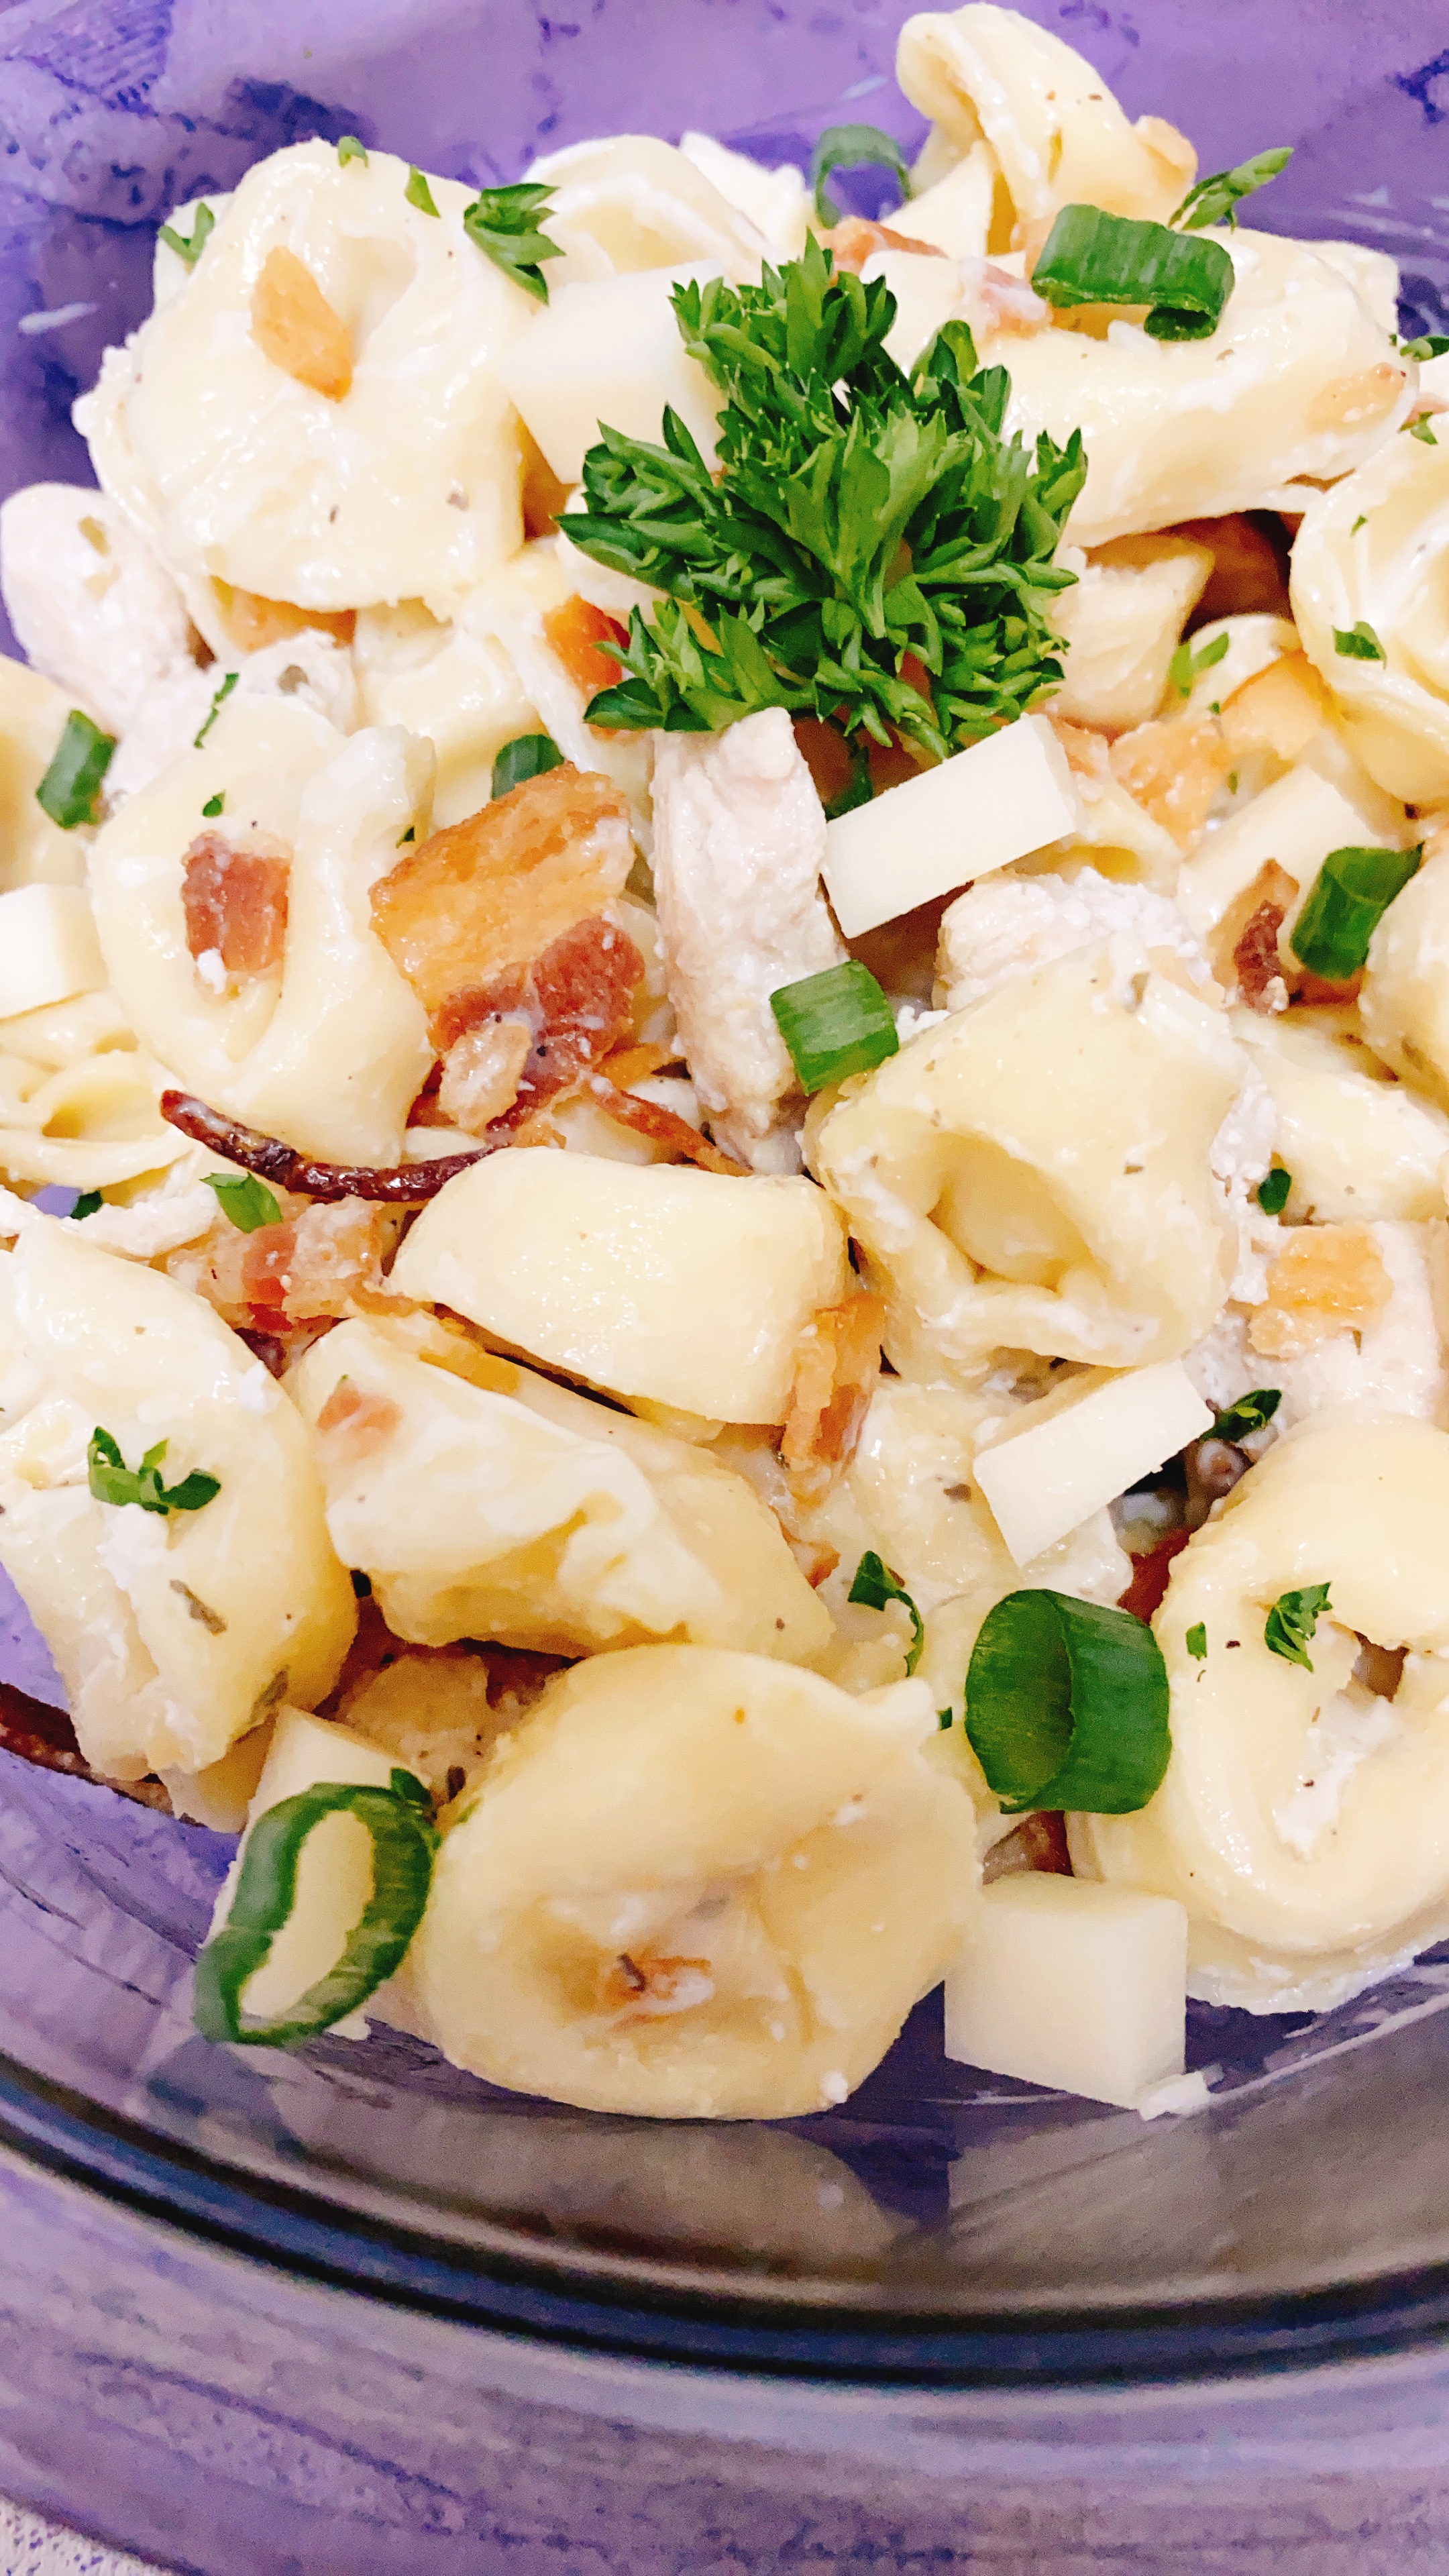 Creamy Tortellini Salad with Chicken, Bacon, and Ranch Dressing